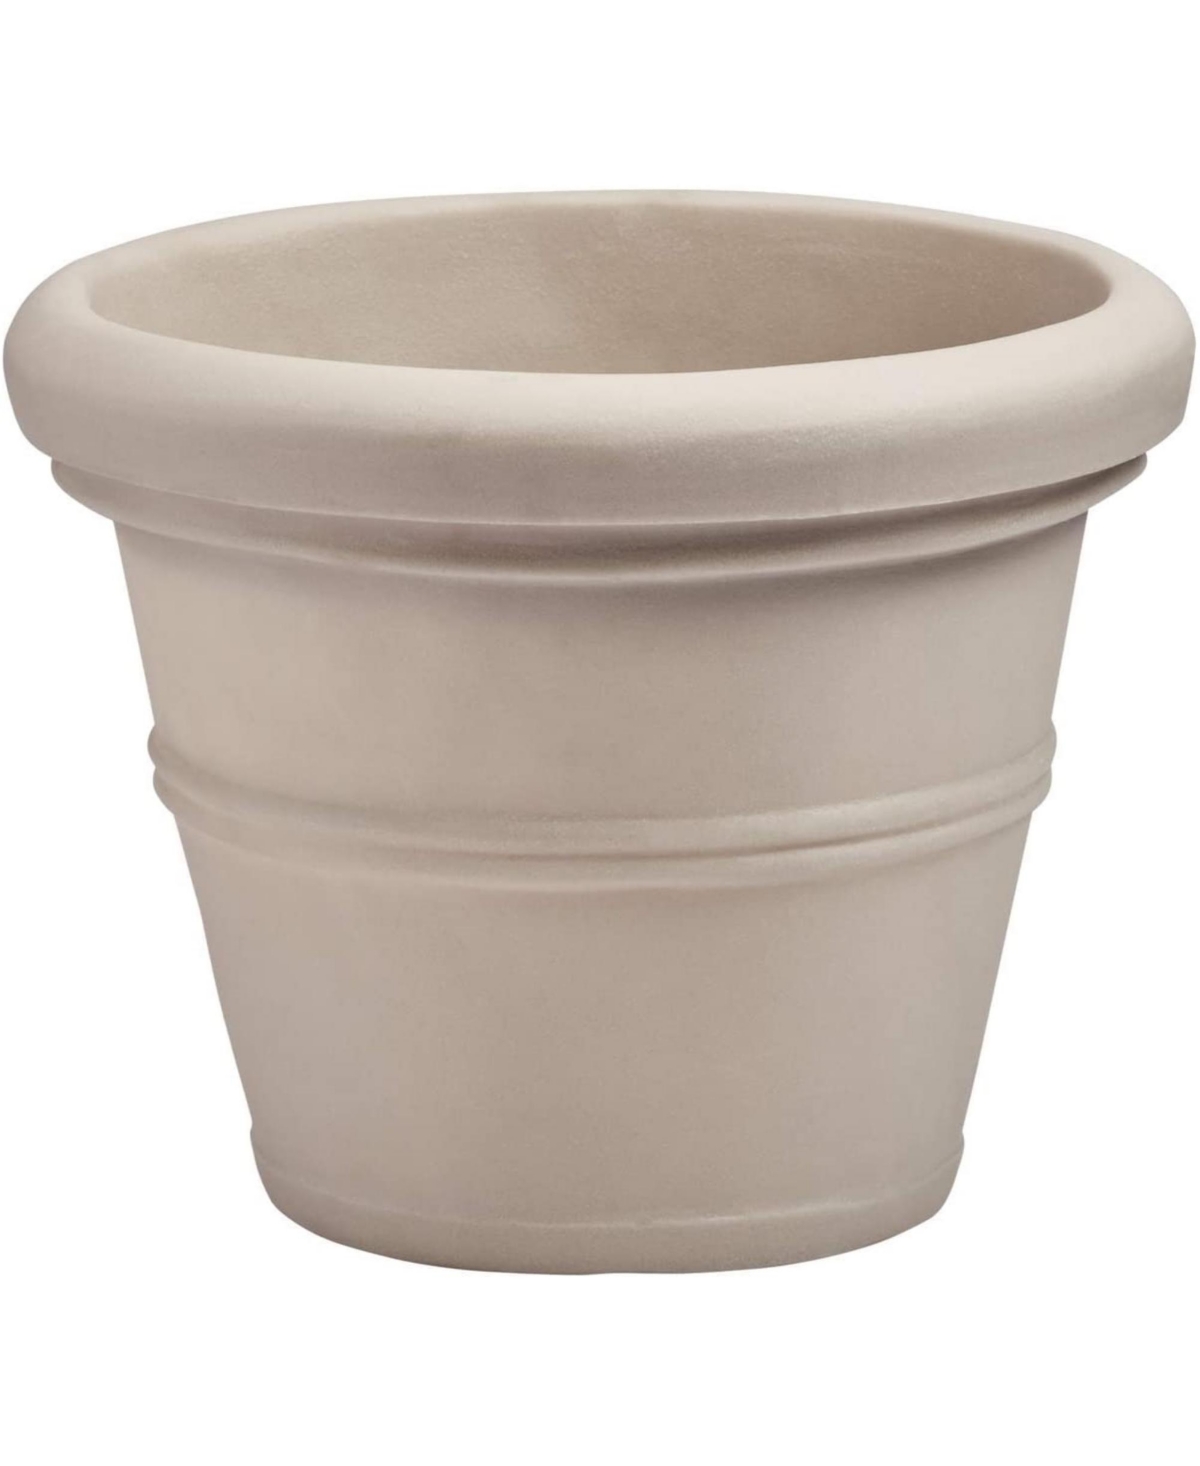 Brunello Classic Pot, Weathered Stone, 14 Inches - Brown